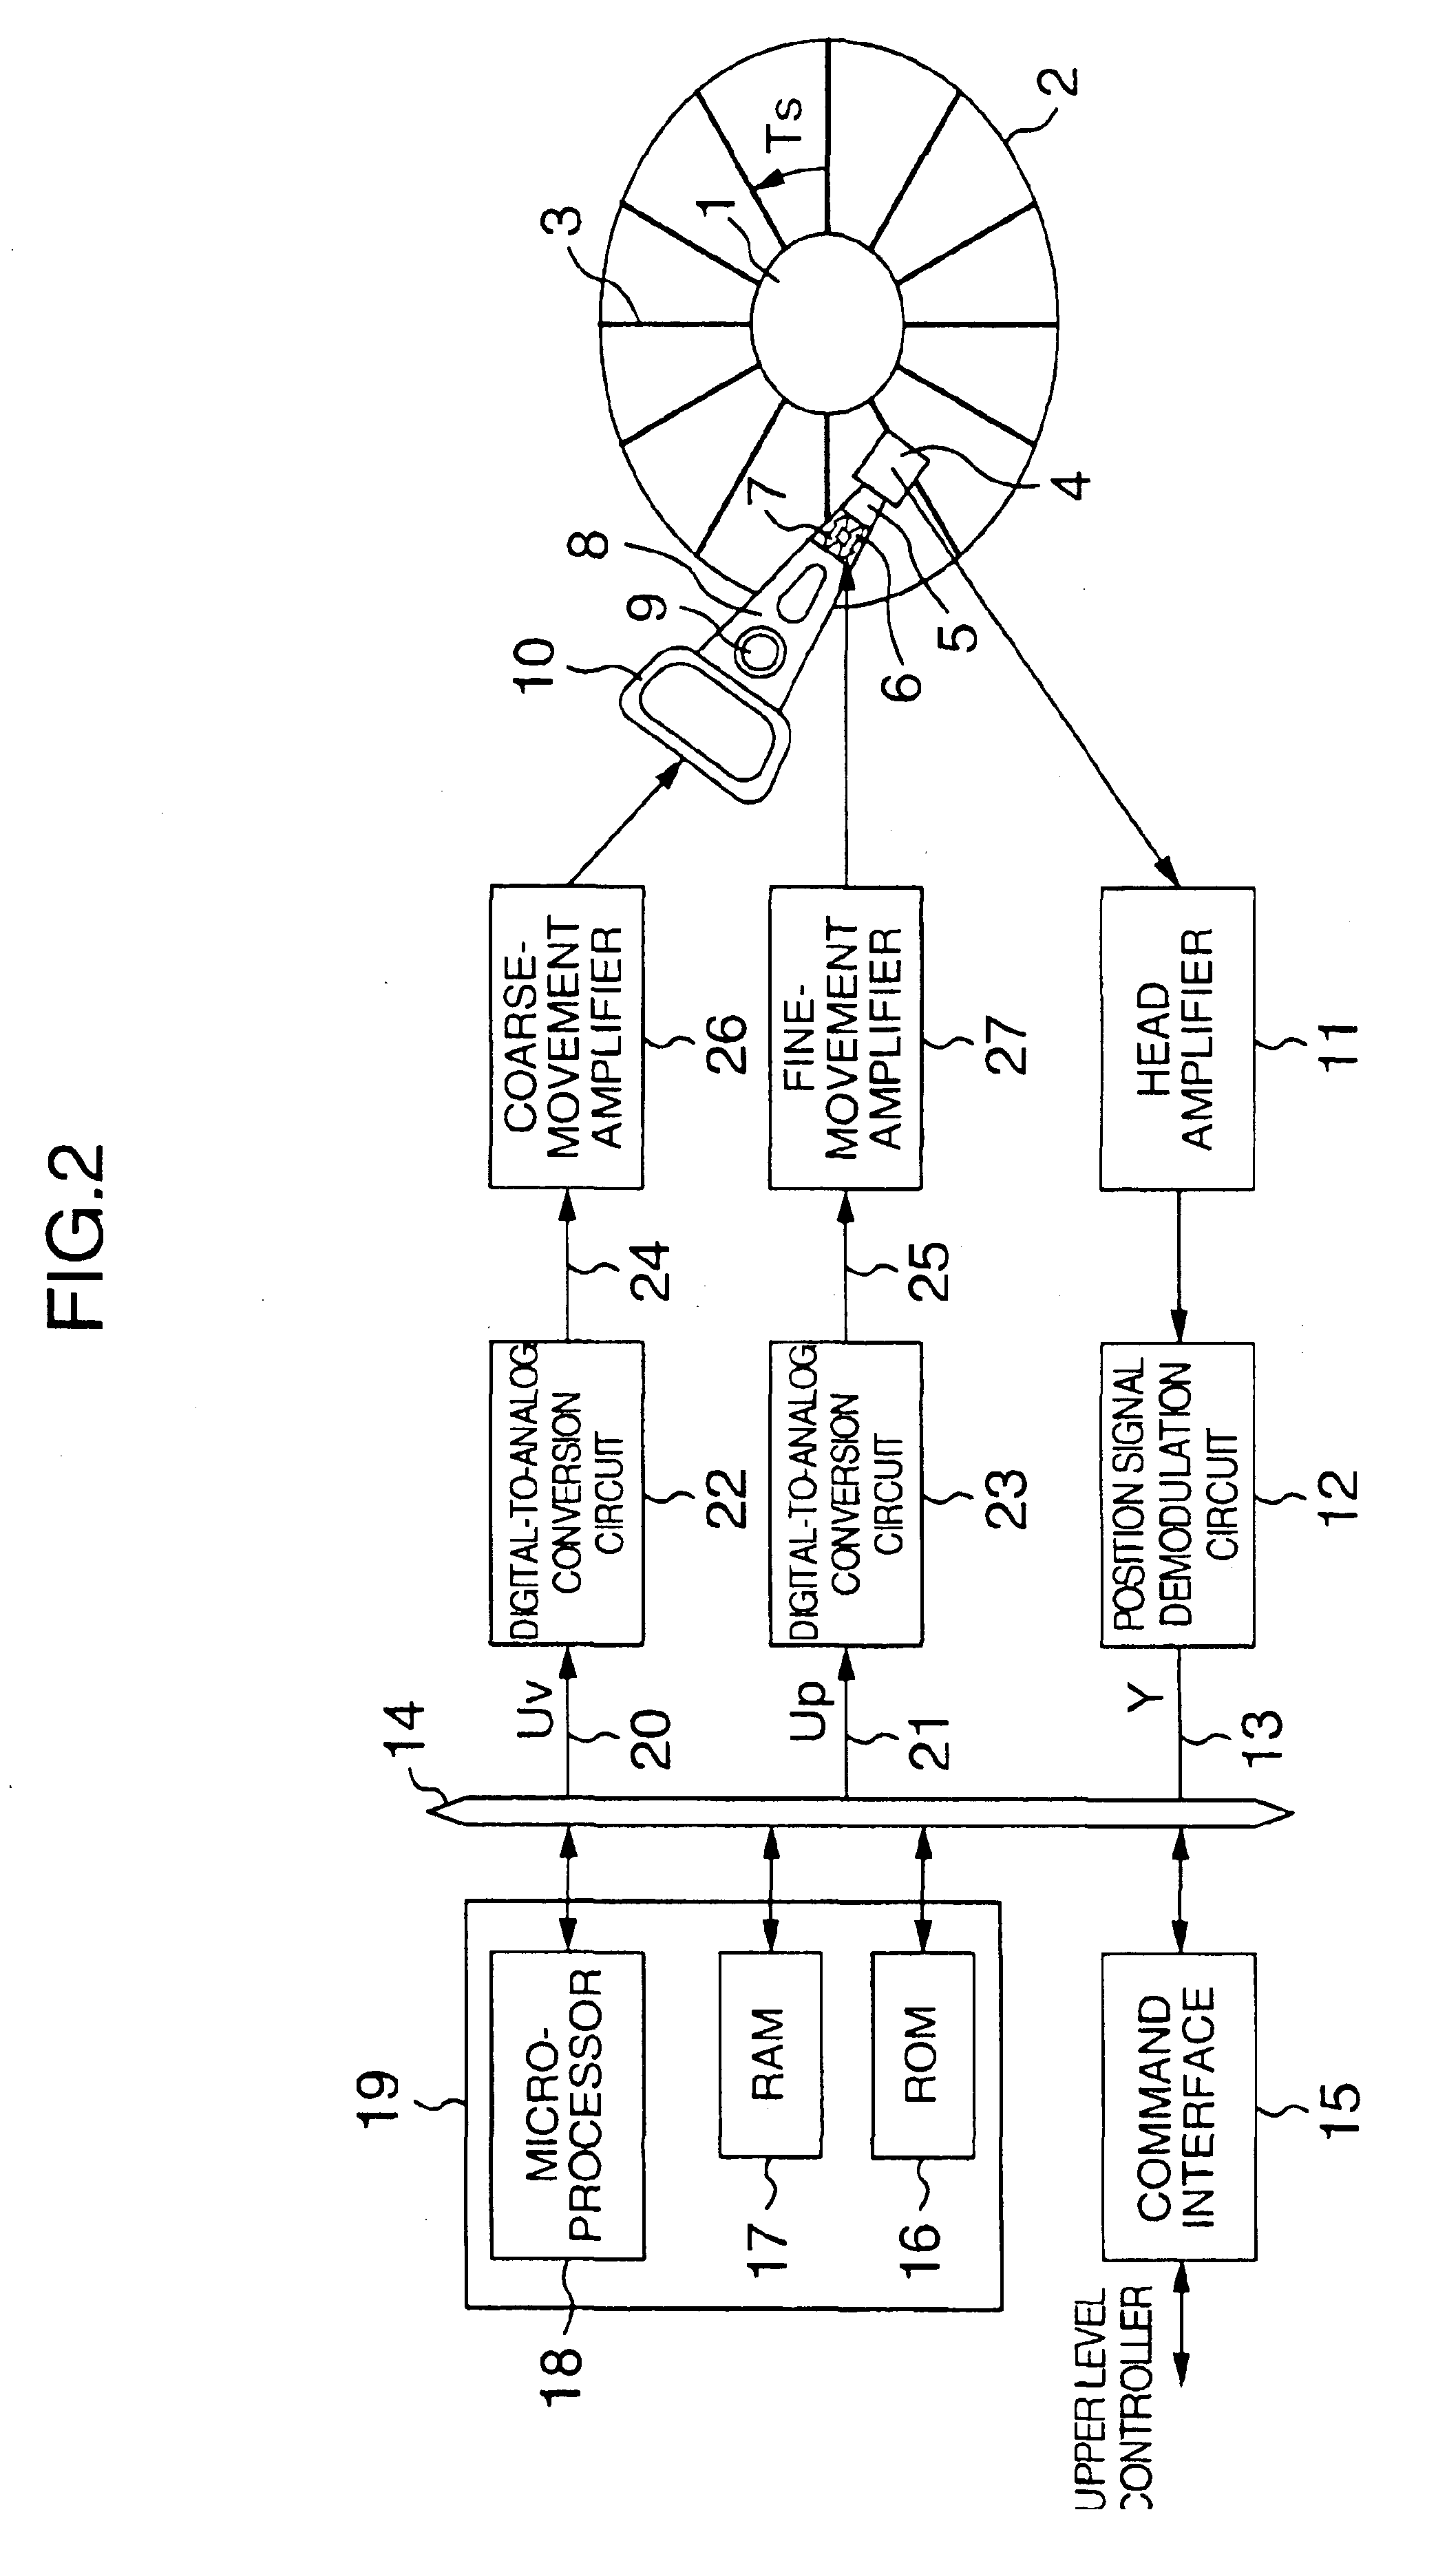 Positioning control device for two-stage actuator